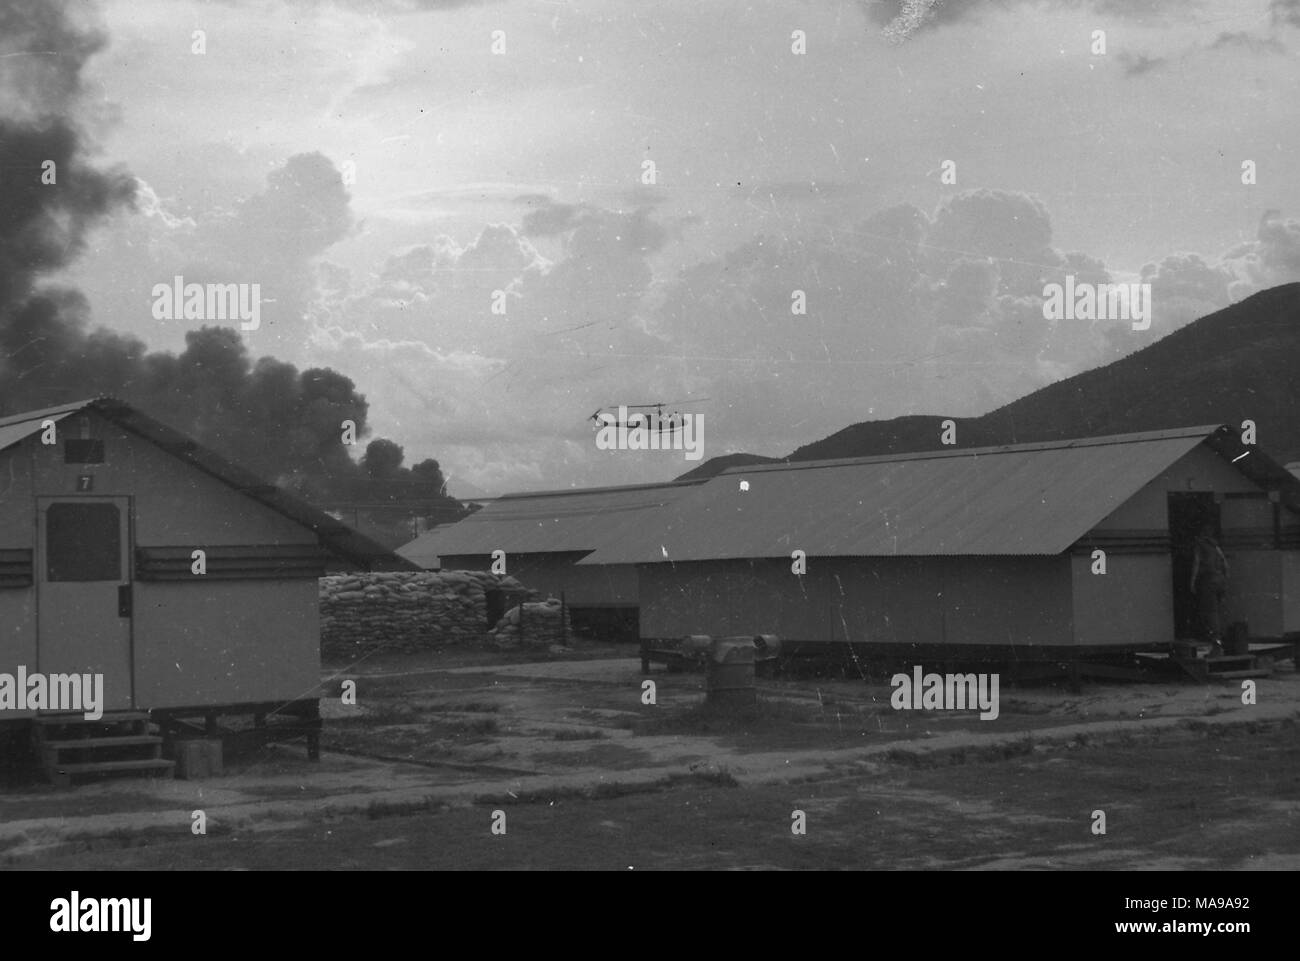 Black and white photograph showing several barracks, and a sandbag bunker, with a soldier walking through a door to the barrack at far right, and a helicopter hovering in the sky in the background, photographed in Vietnam during the Vietnam War (1955-1975), 1968. () Stock Photo